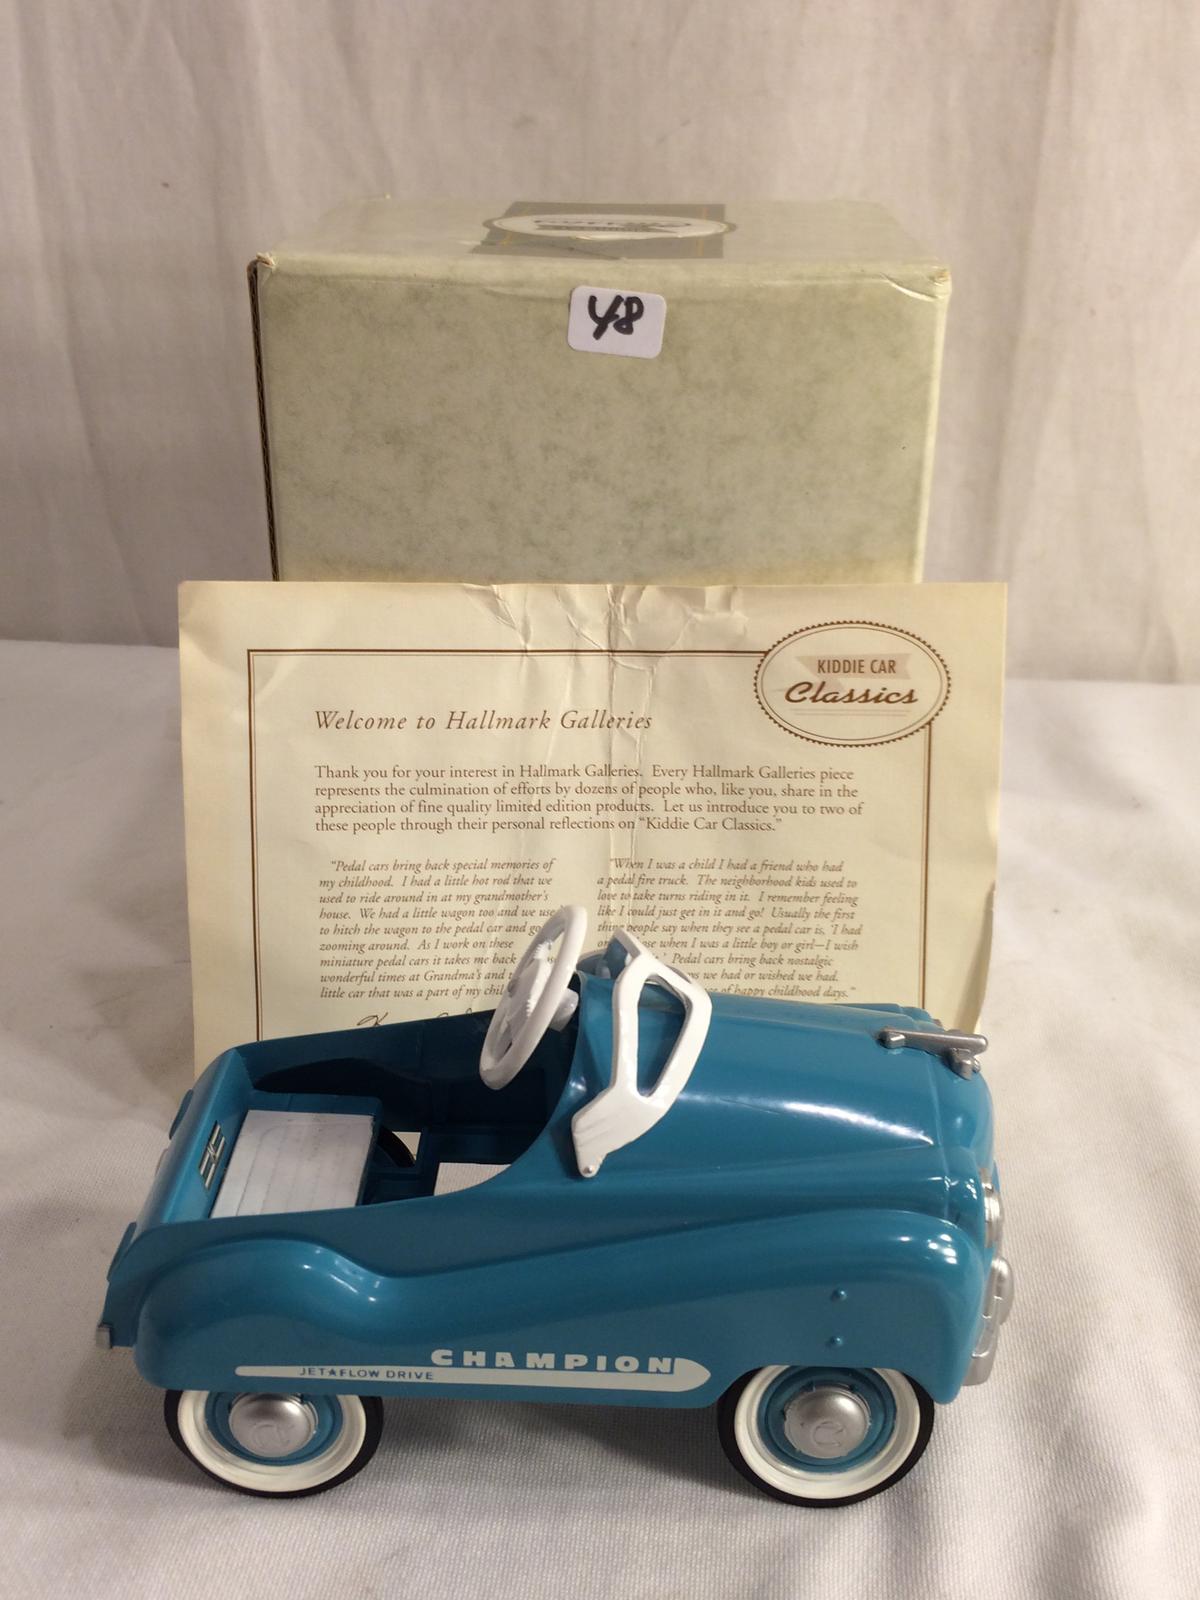 Collector New Kiddie Car Classics Murray Chmapion  Limited Edition Die-Cast Car 7.1/4"T by 5.1/2"W